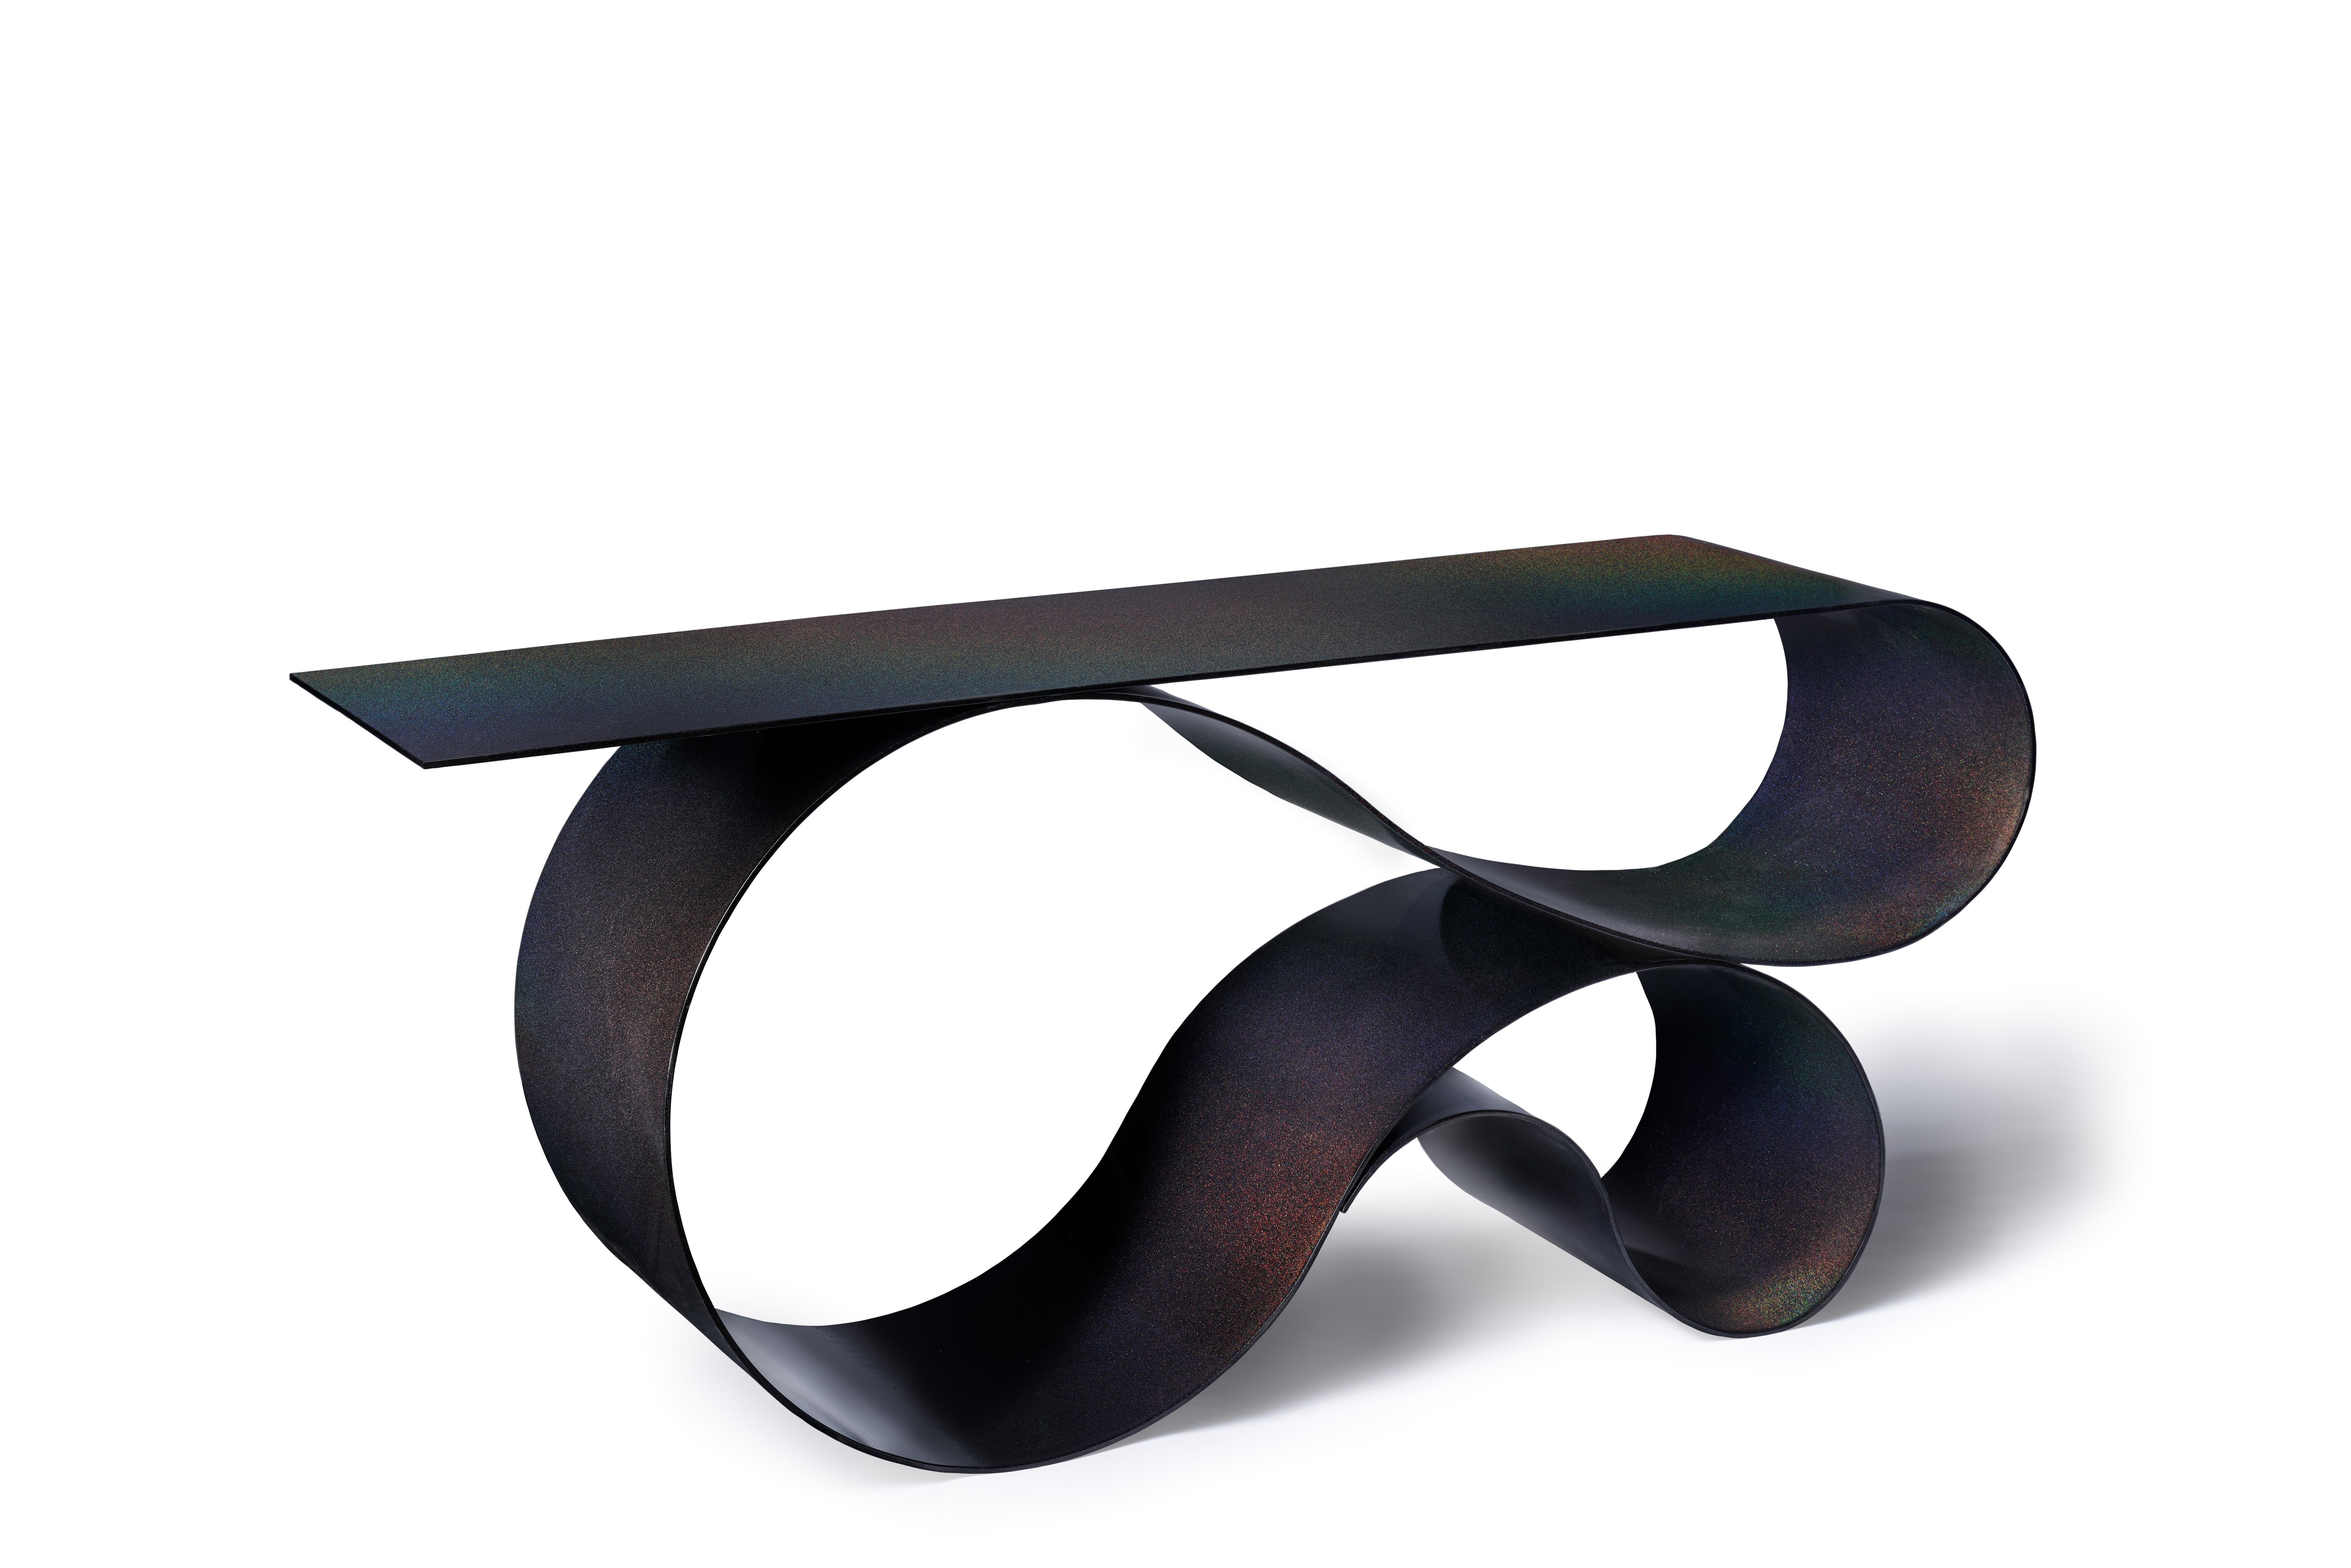 Hand-Crafted Whorl Console, in Black Iridescent Powder Coated Aluminum by Neal Aronowitz For Sale